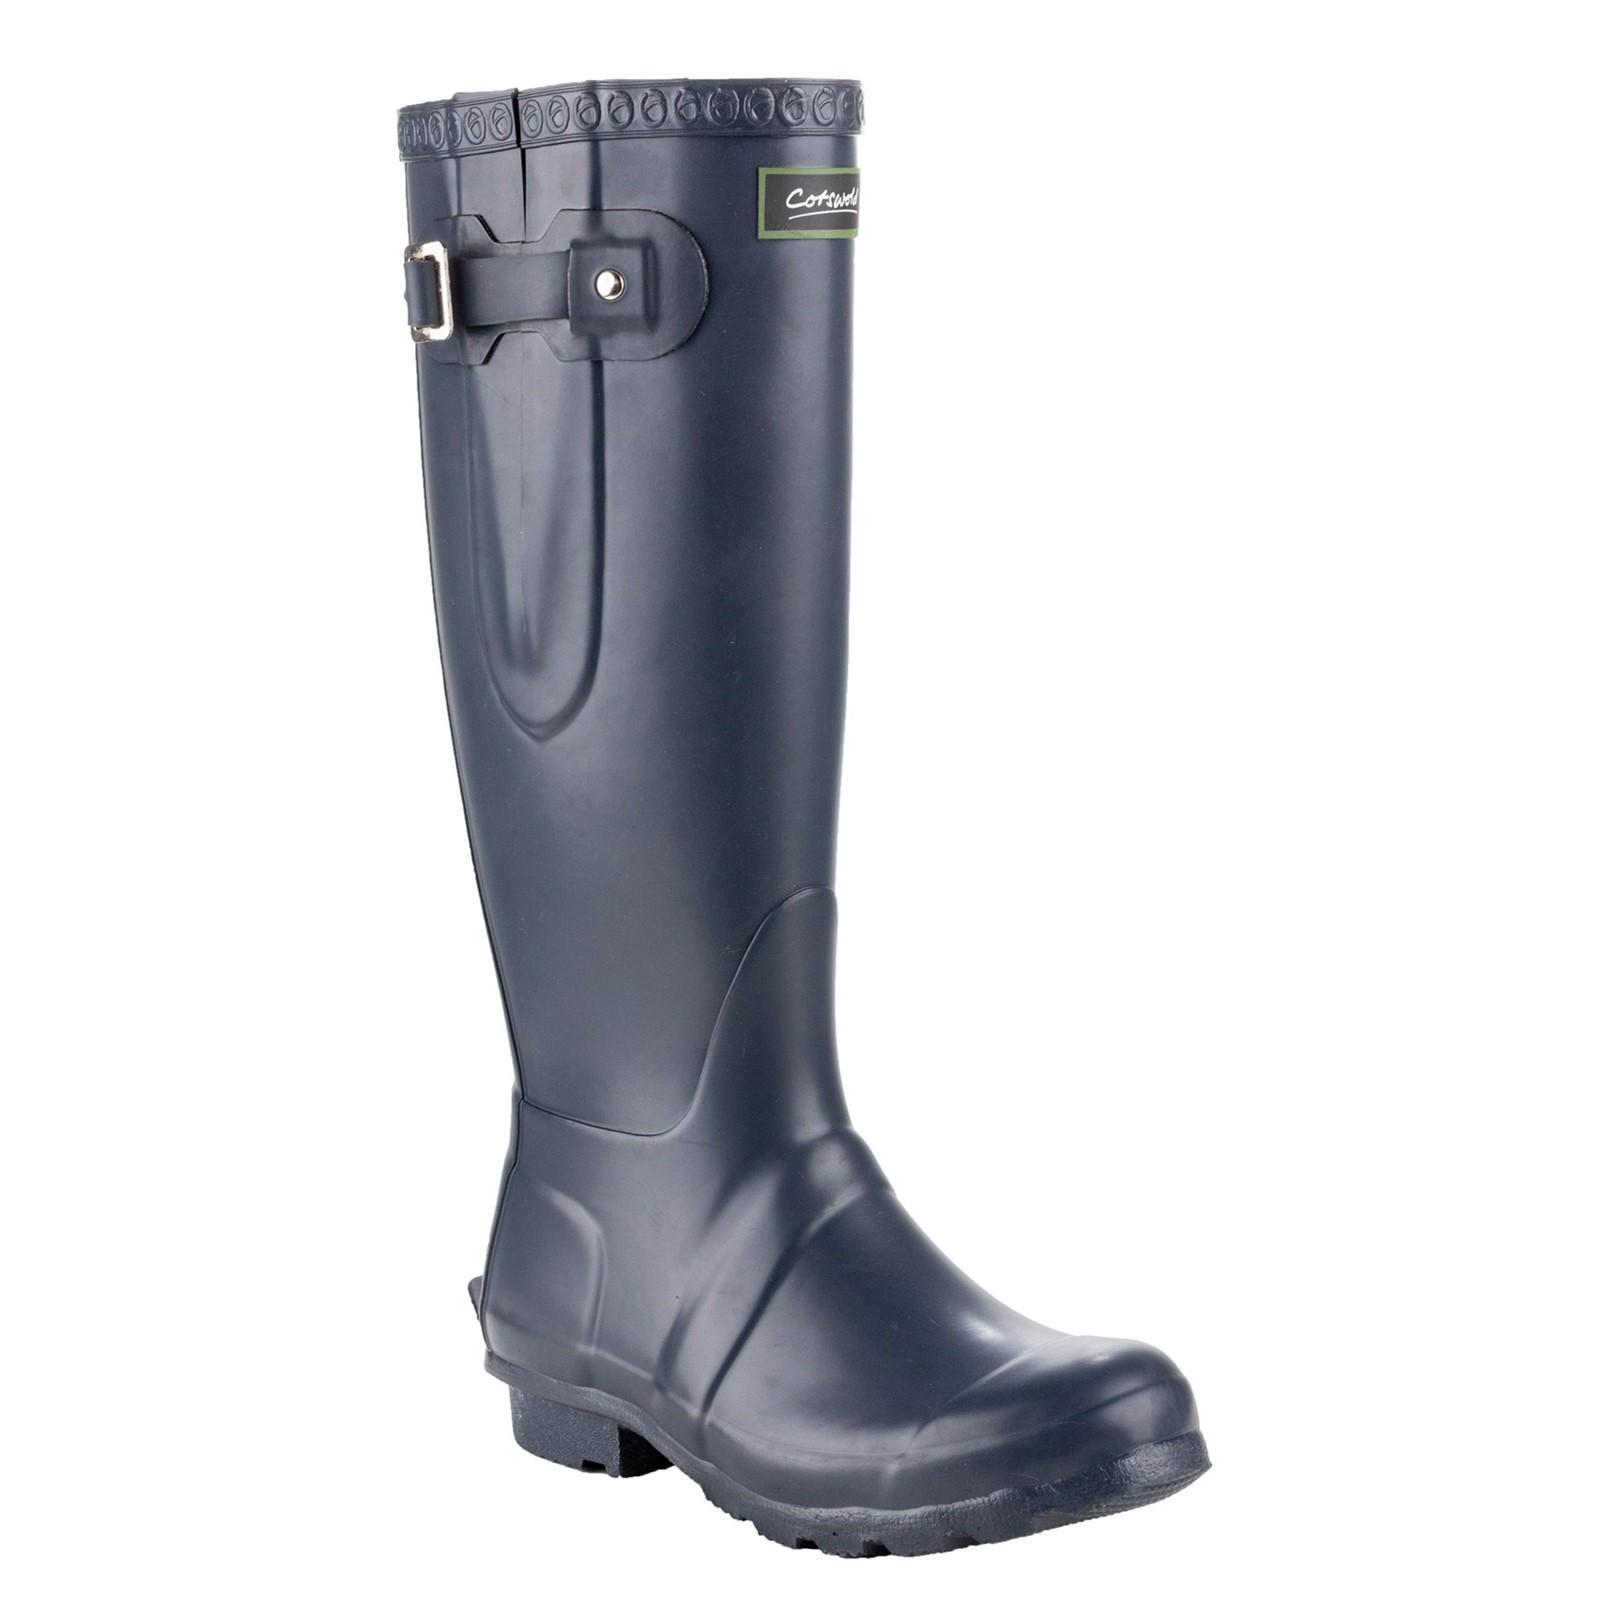 COTSWOLD Unisex Adult Windsor Tall Wellington Boots (Navy)